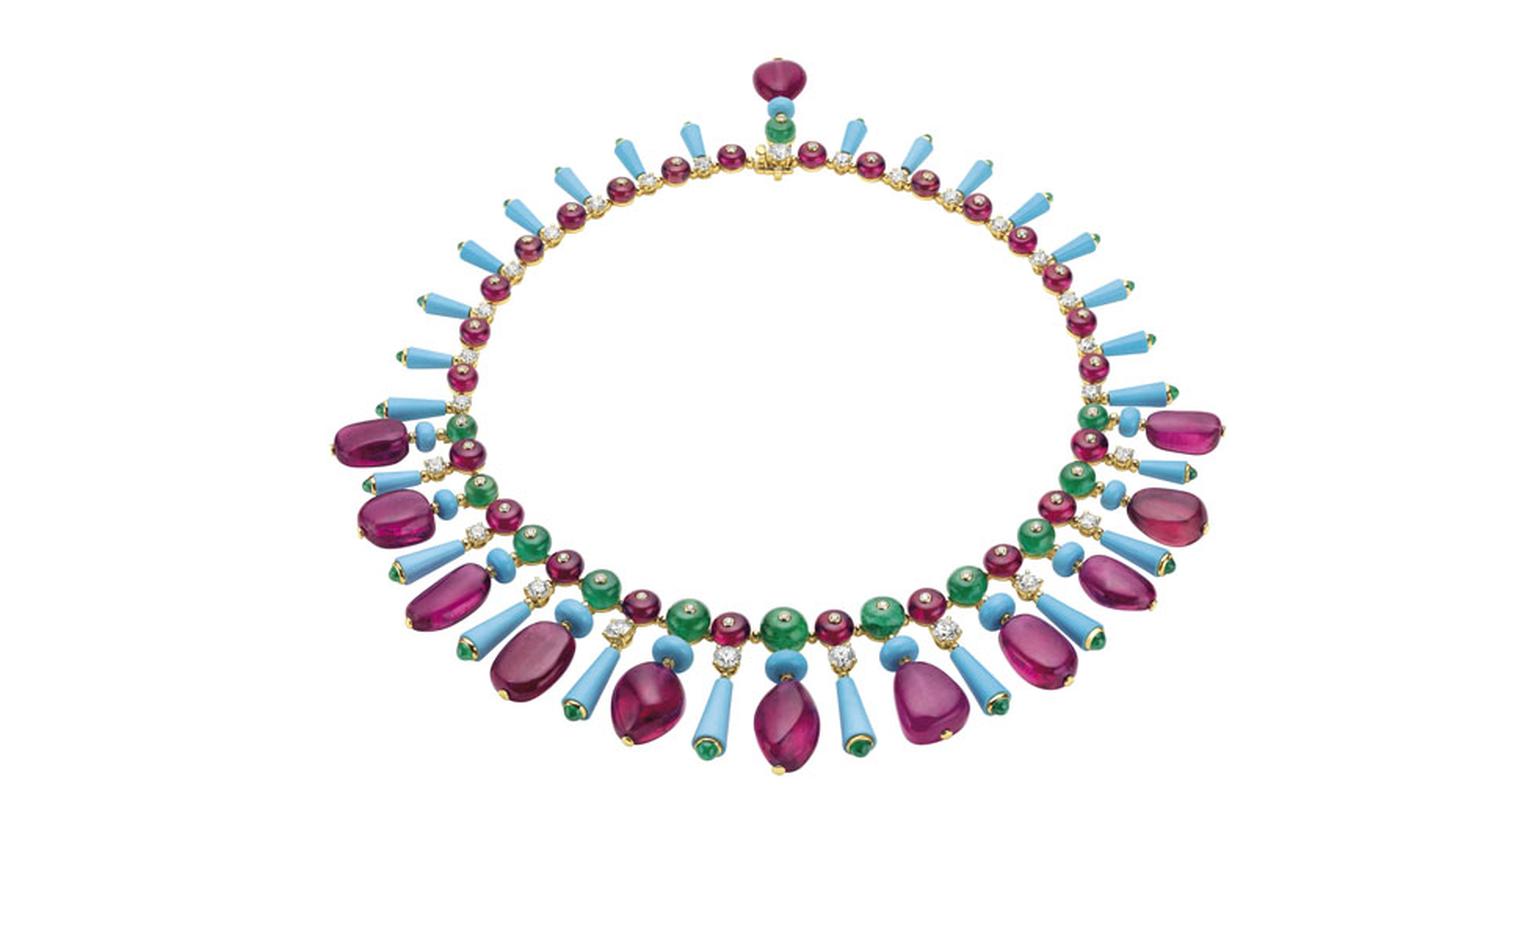 Bulgari. High Jewellery necklace in yellow gold with 11 fancy-shaped rubellites, fancy-shaped and bead cut turquoises, emerald beads, rubellite beads, cabochon cut and emerald beads. POA